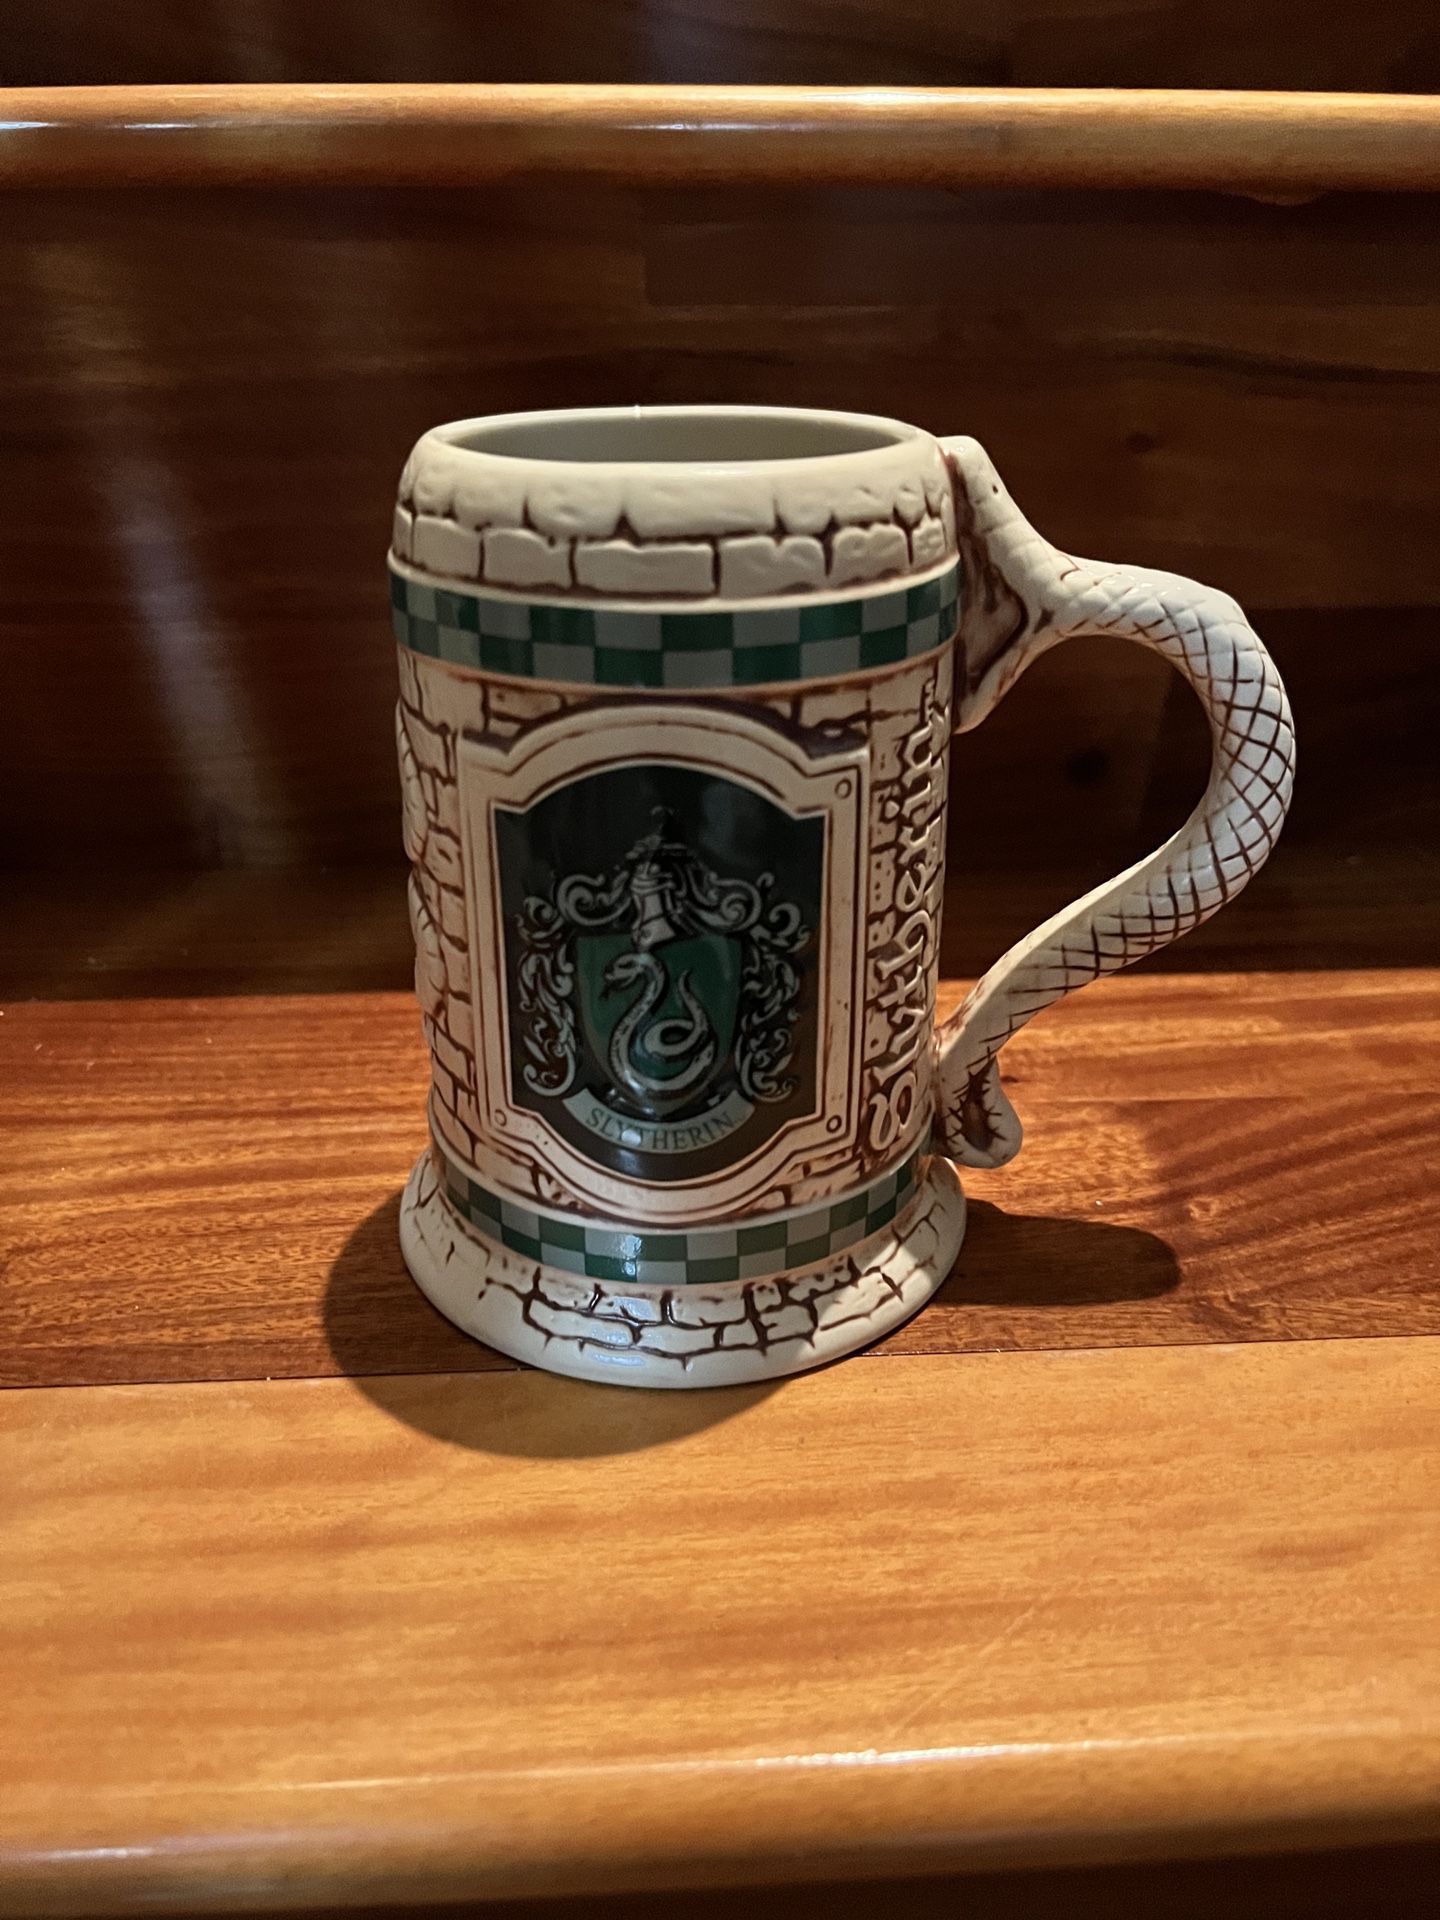 The Wizarding world of Harry Potter Sculptured stein/mugfrom Warner Bros.